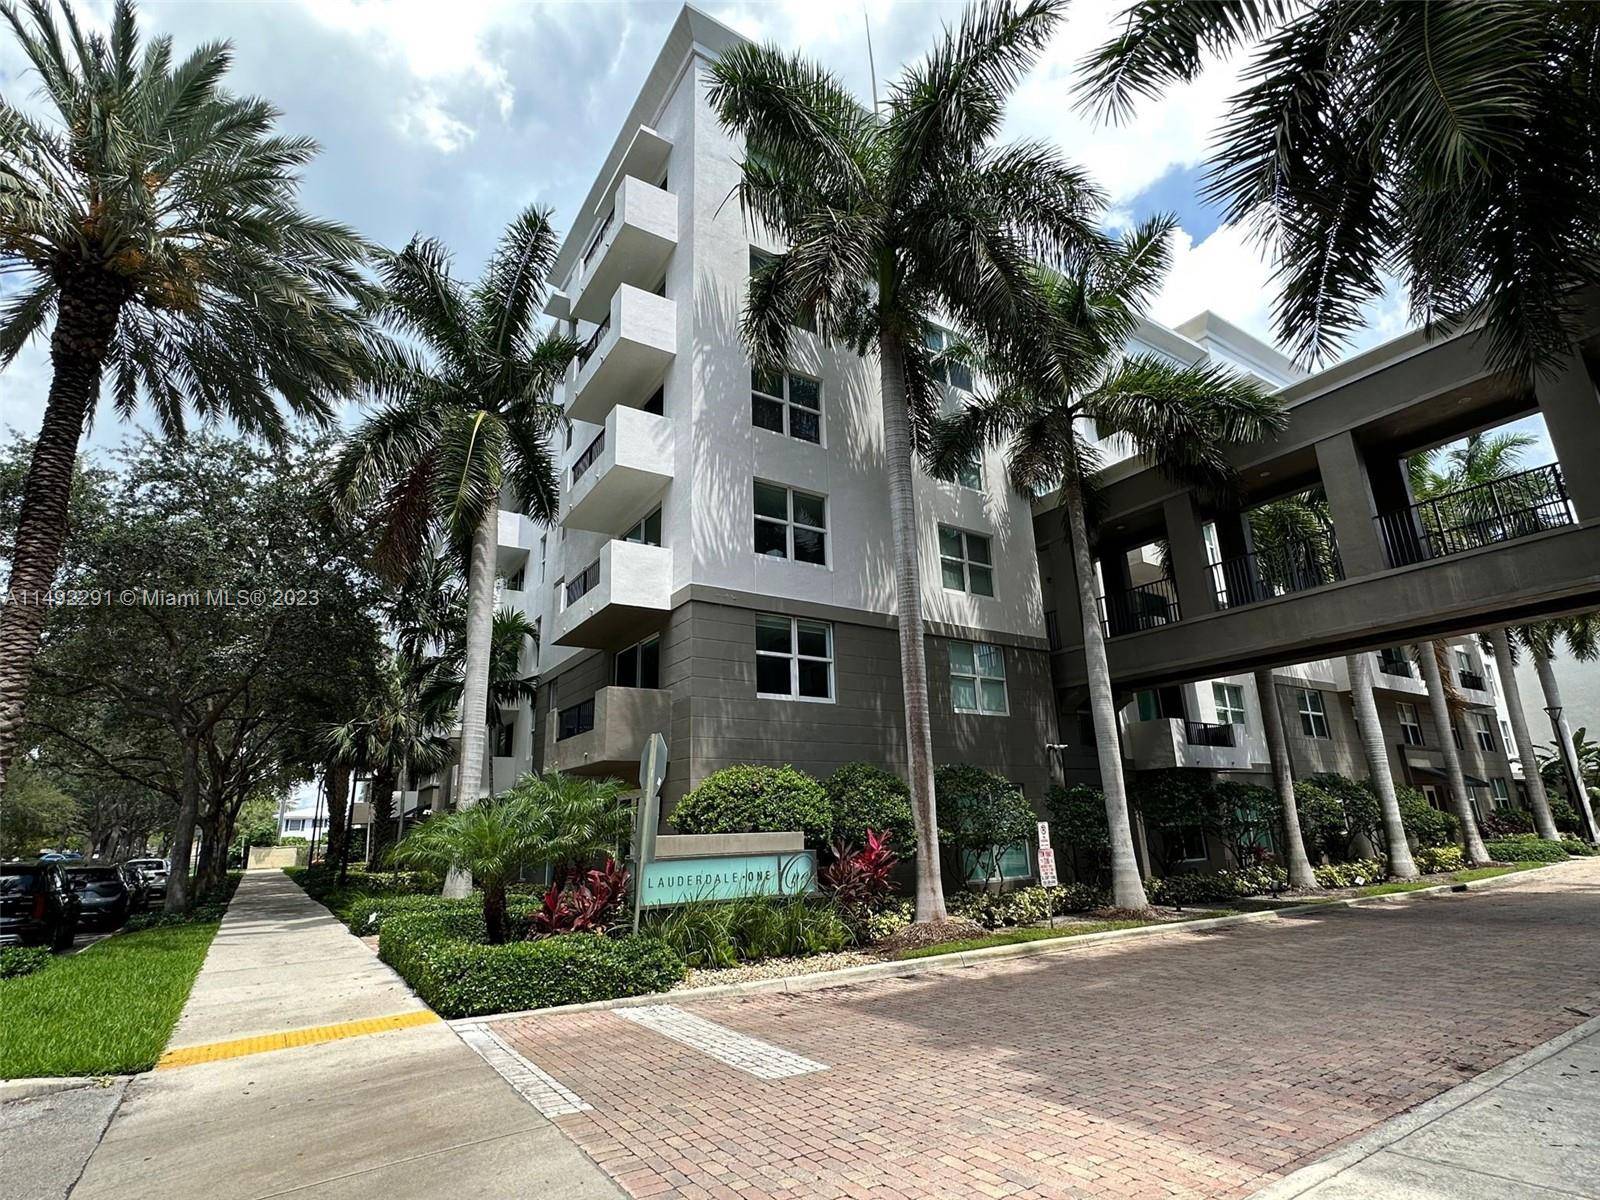 GREAT 2 BEDROOM 2 BATH CONDO IN THE EXTREMELY DESIRABLE LAUDERDALE ONE.